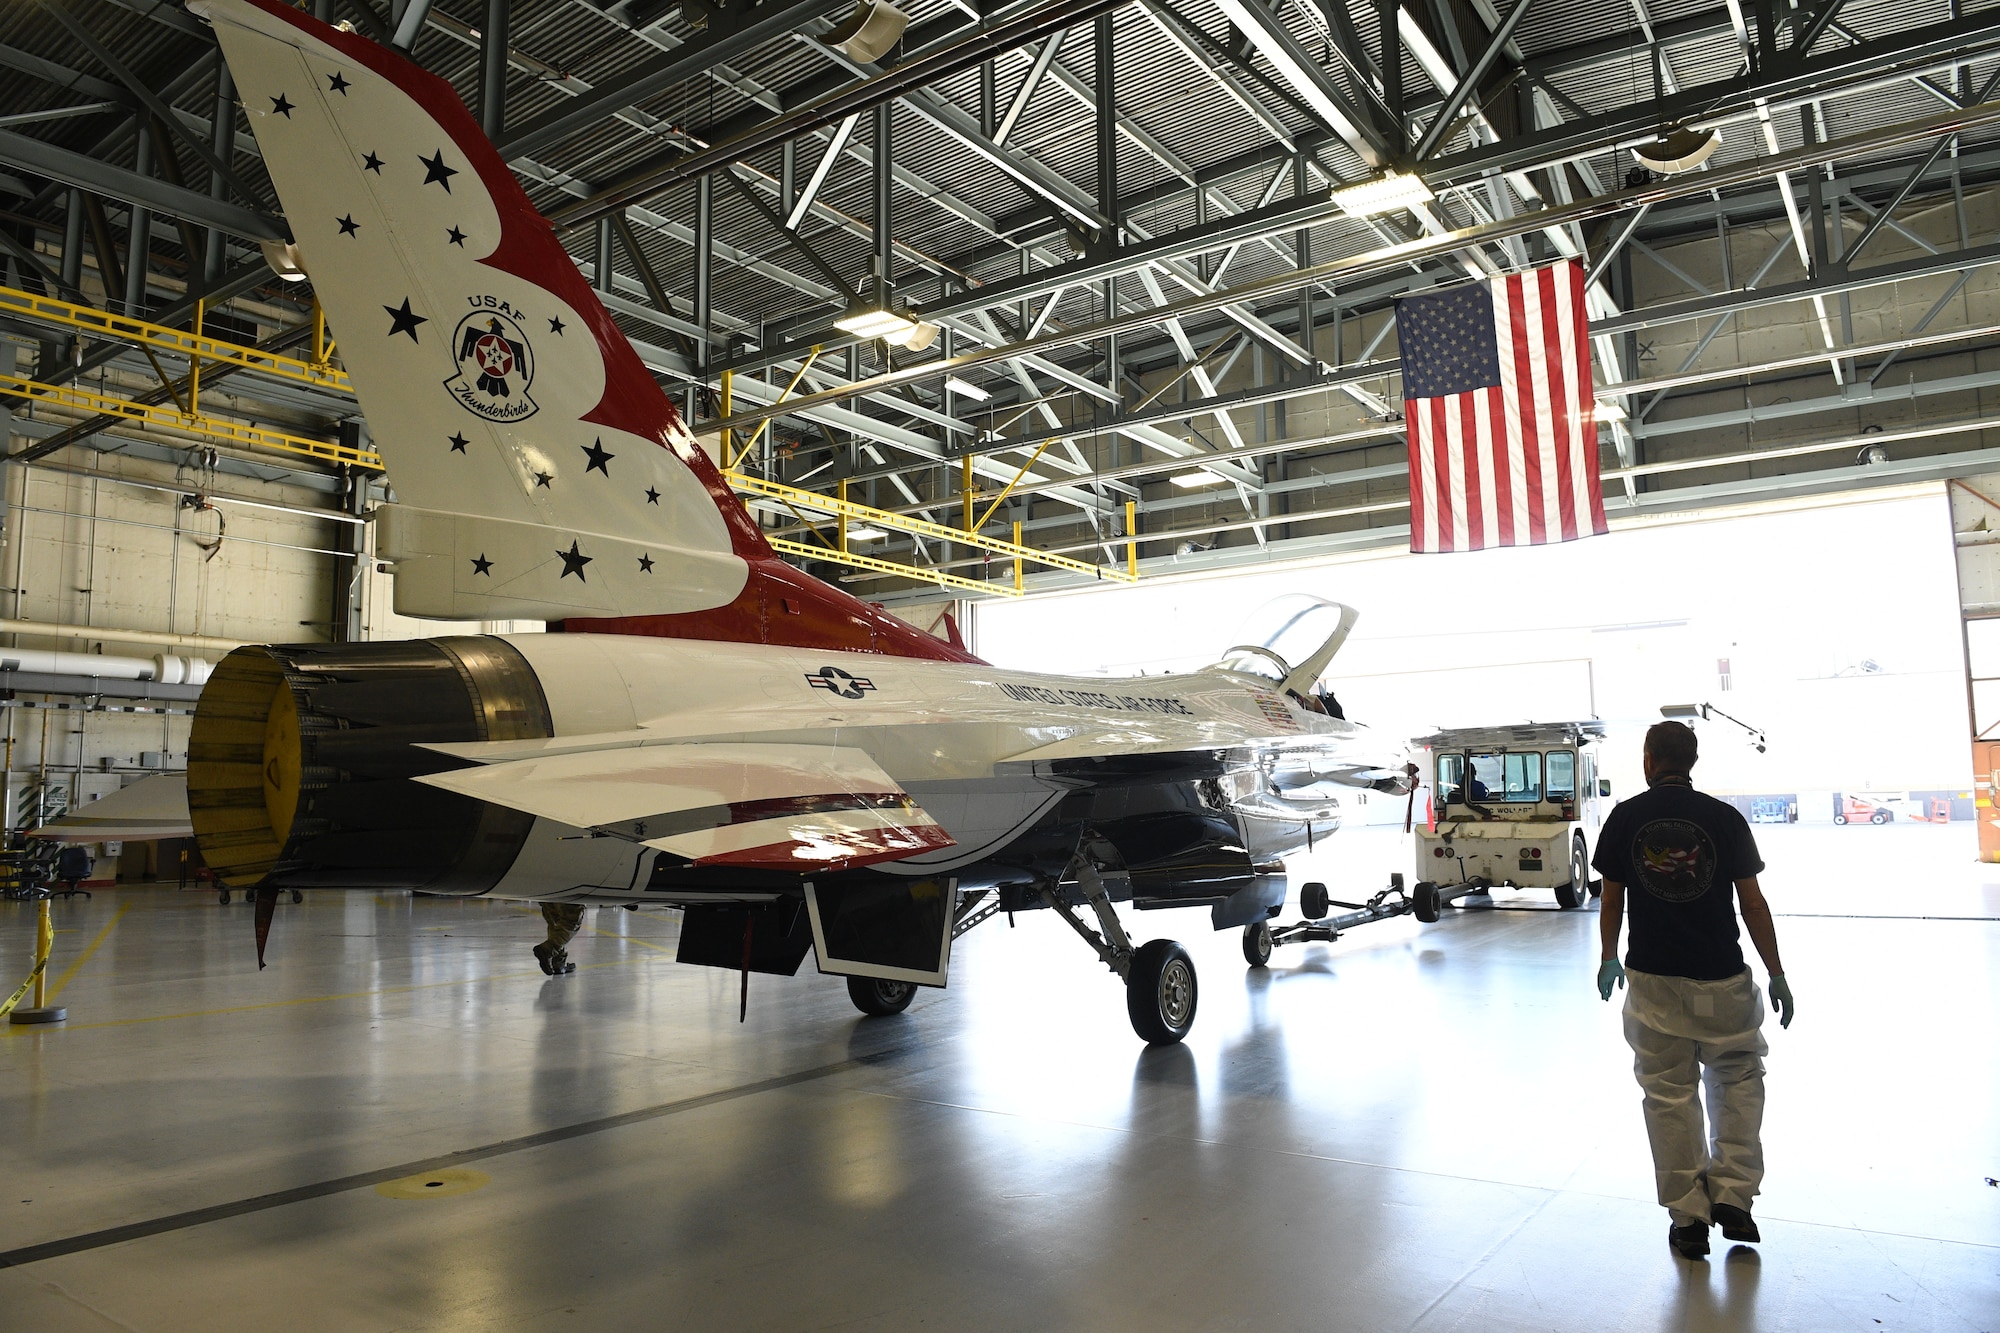 A U.S. Air Force Thunderbird F-16 jet is towed out of a hangar April 26, 2018 at Hill Air Force Base, Utah. The aircraft was the first to receive structural modifications as part of the F-16 Service Life Extension Program, or SLEP, that will keep the jet flying for decades. (U.S. Air Force photo by R. Nial Bradshaw)